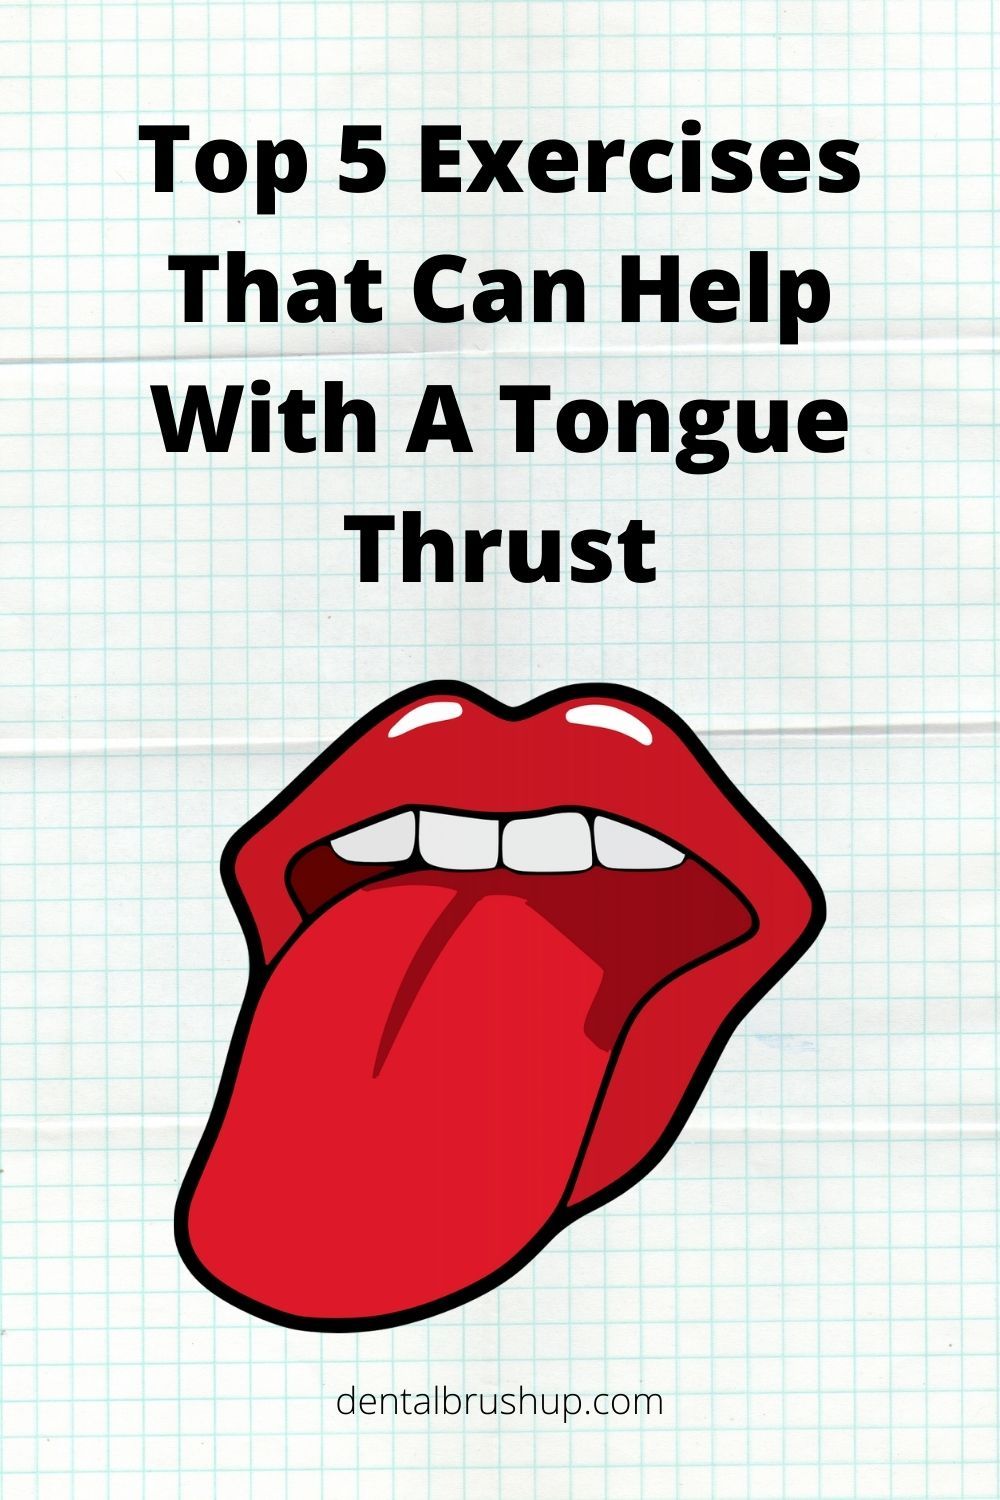 Top 5 Exercises That Can Help With A Tongue Thrust in 2020 ...